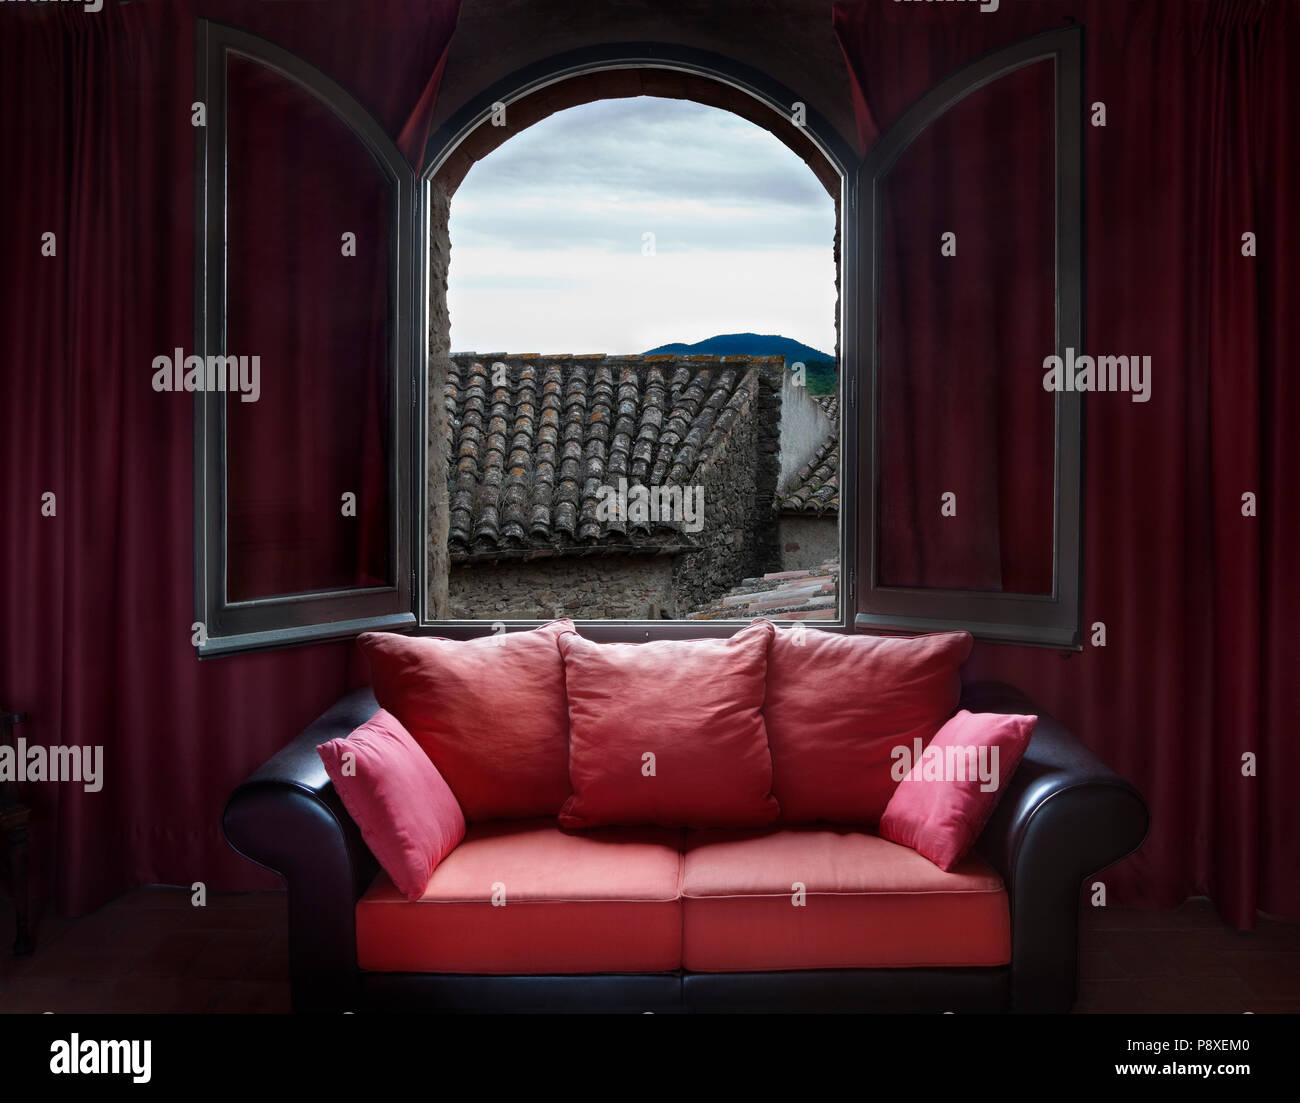 Interior detail couch and window with views of ancient roofs Stock Photo